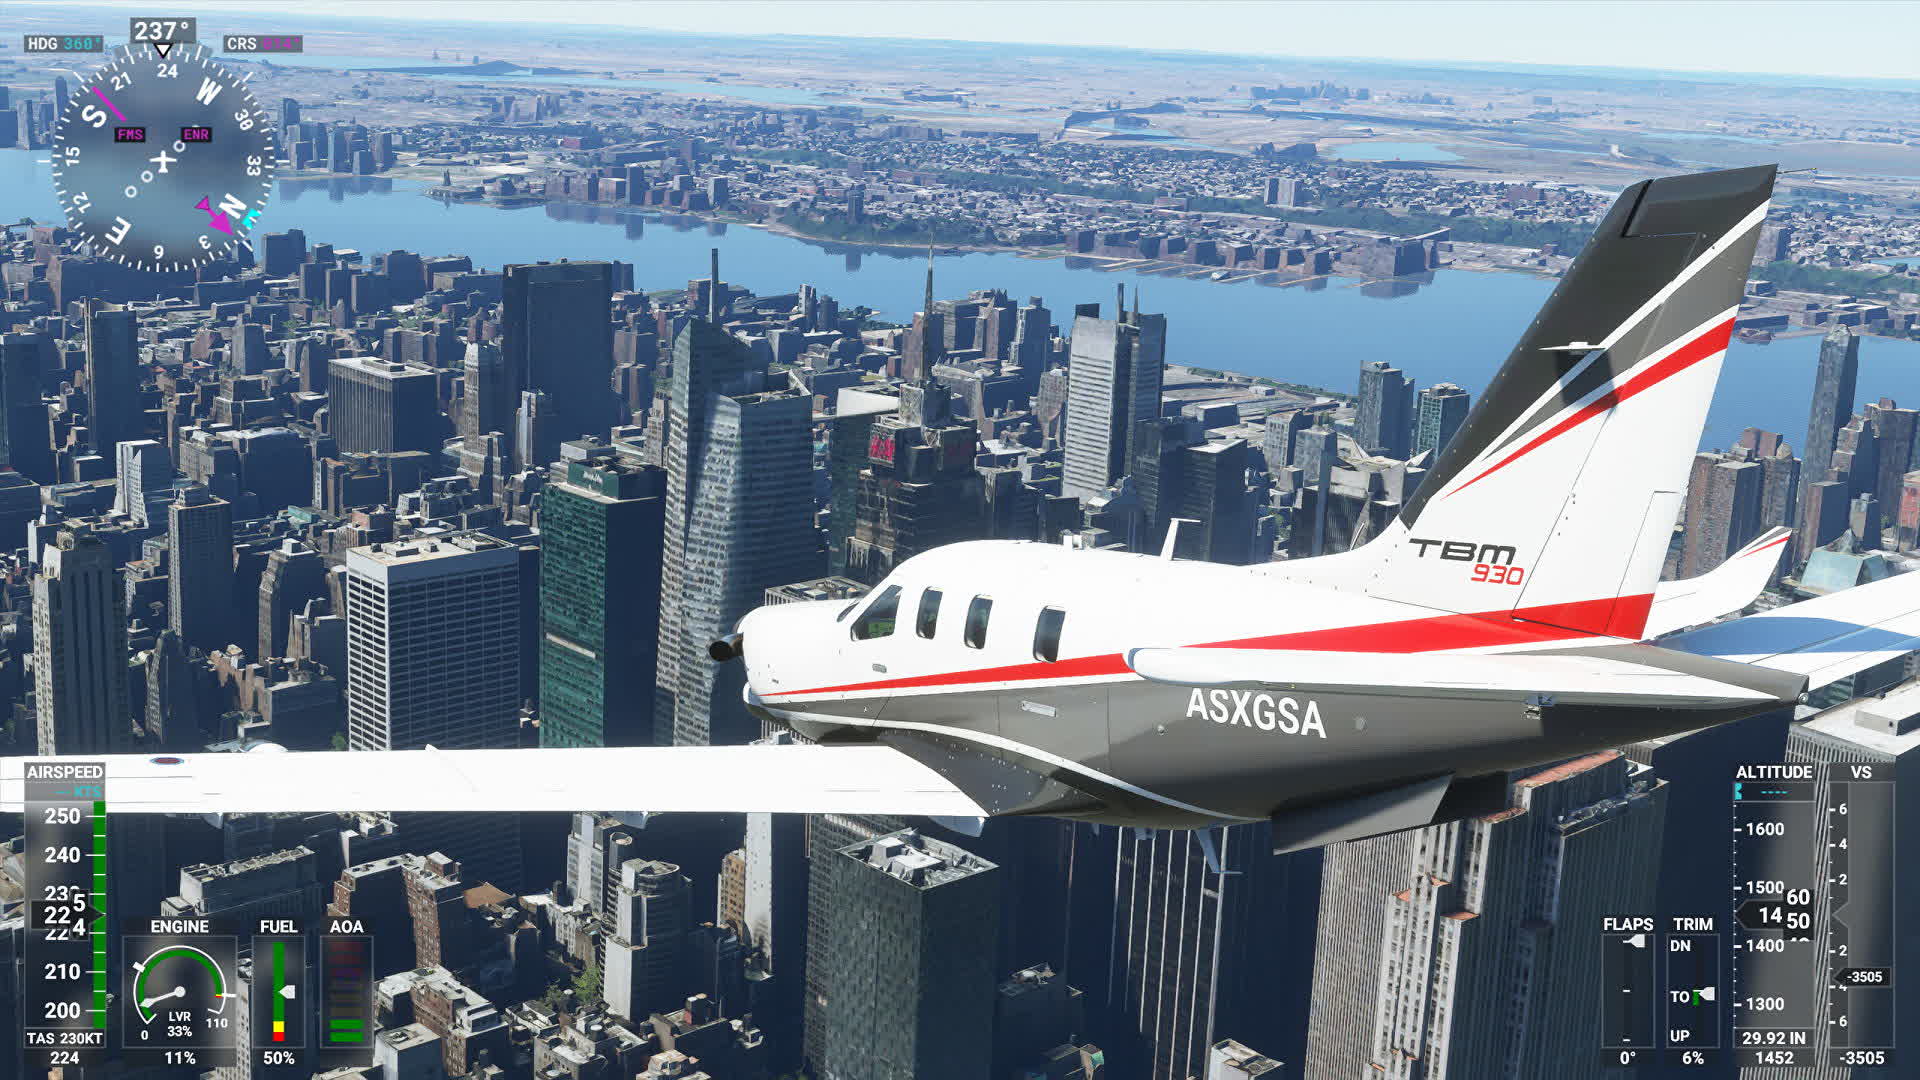 Microsoft Flight Simulator game engine gets reworked to optimize performance